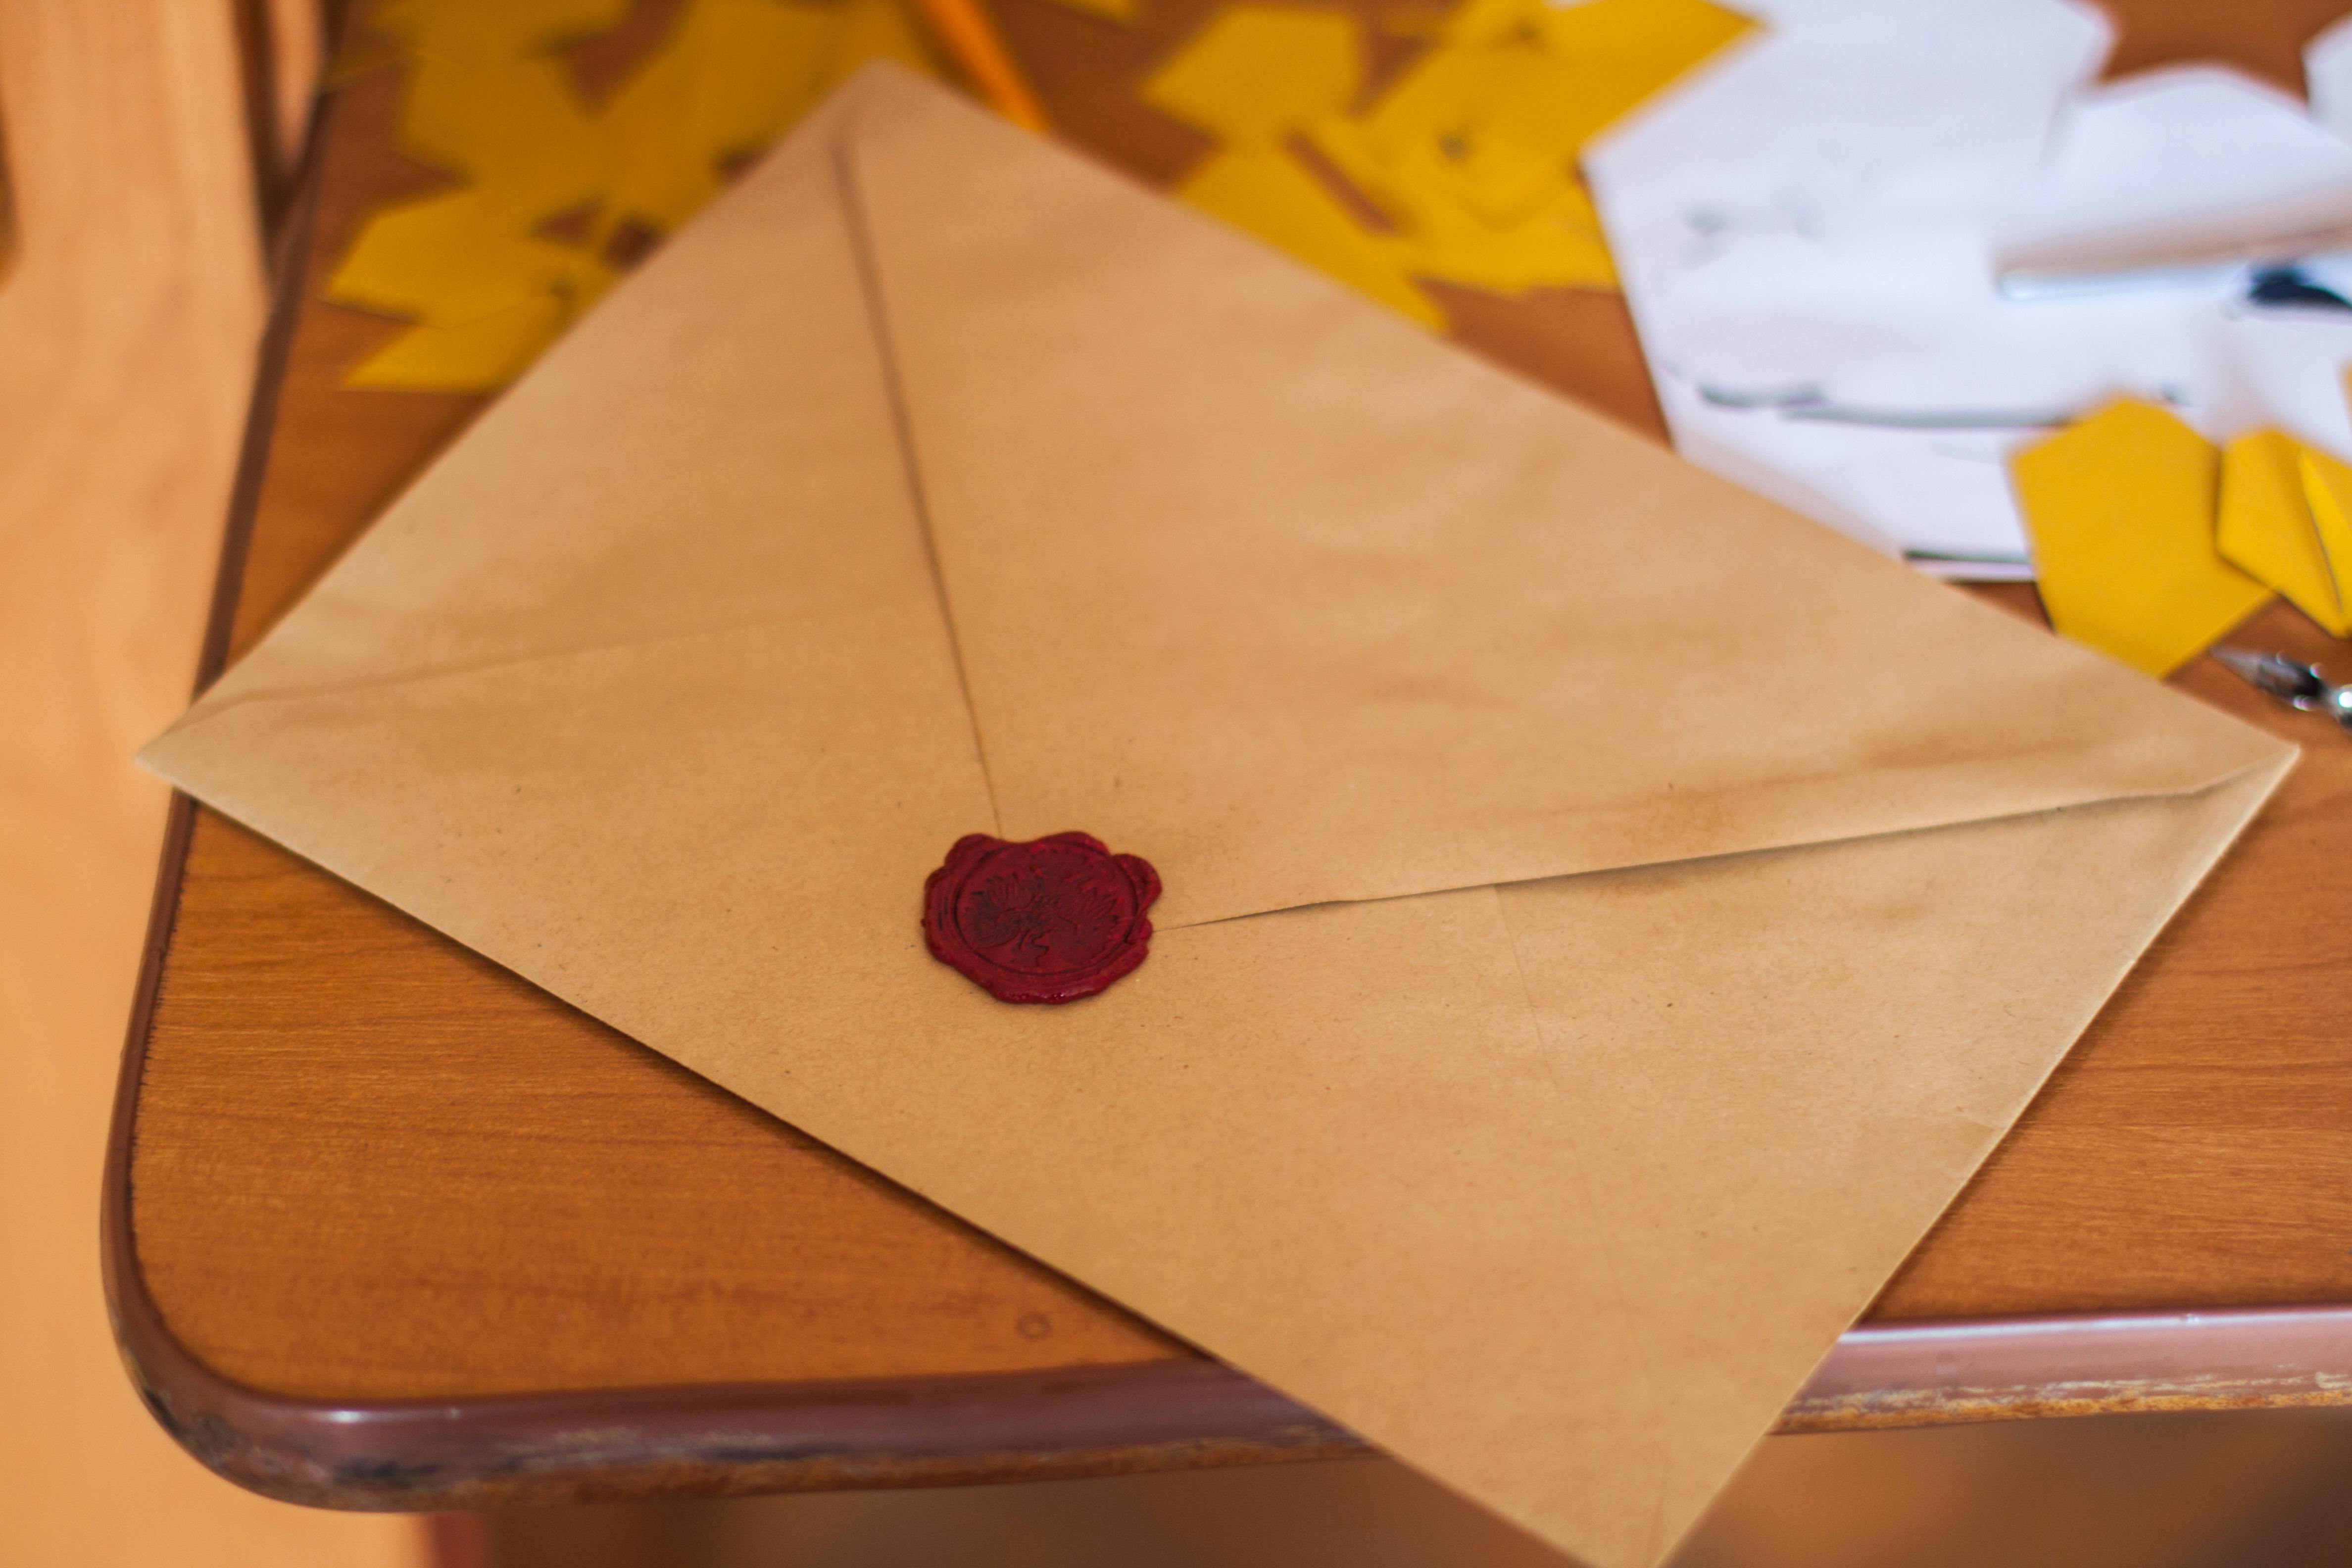 A brown envelope on a table. For illustration purposes only | Source: Pexels